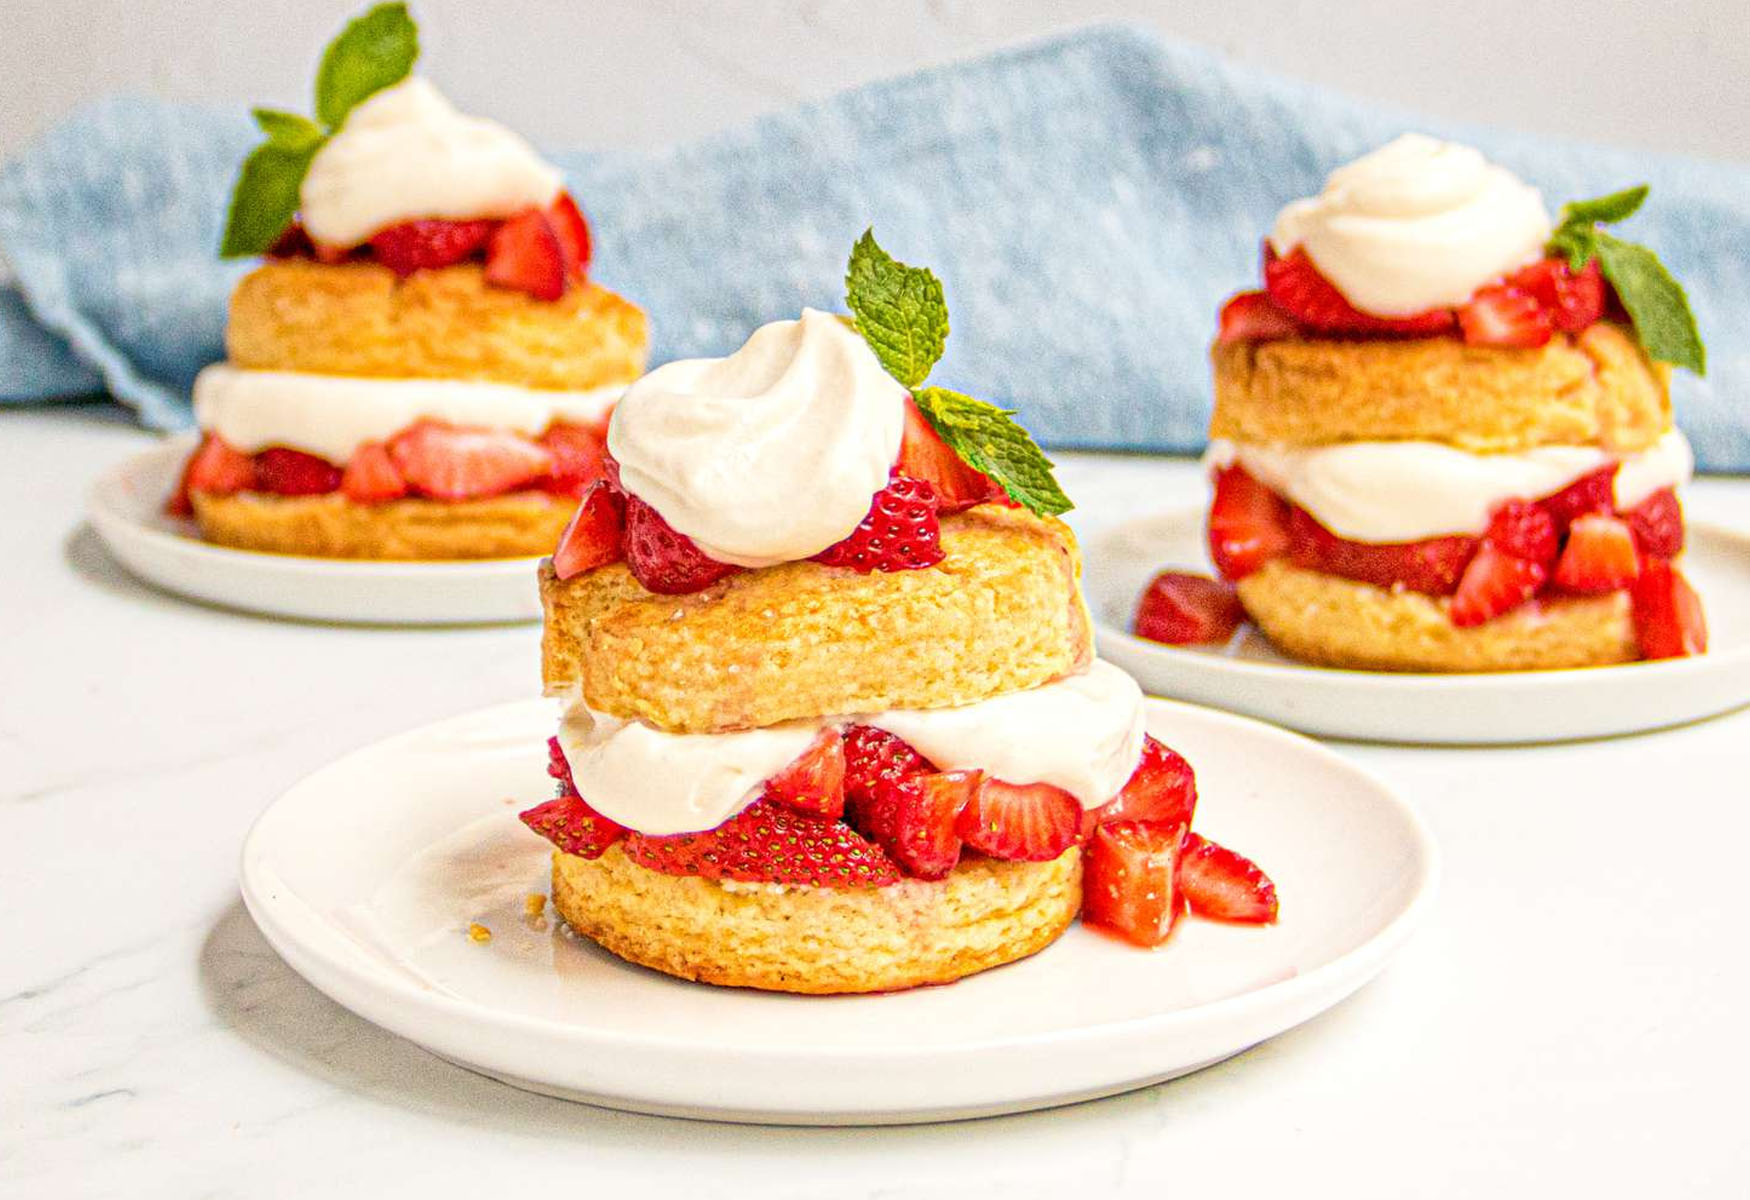 19-strawberry-shortcake-nutrition-facts